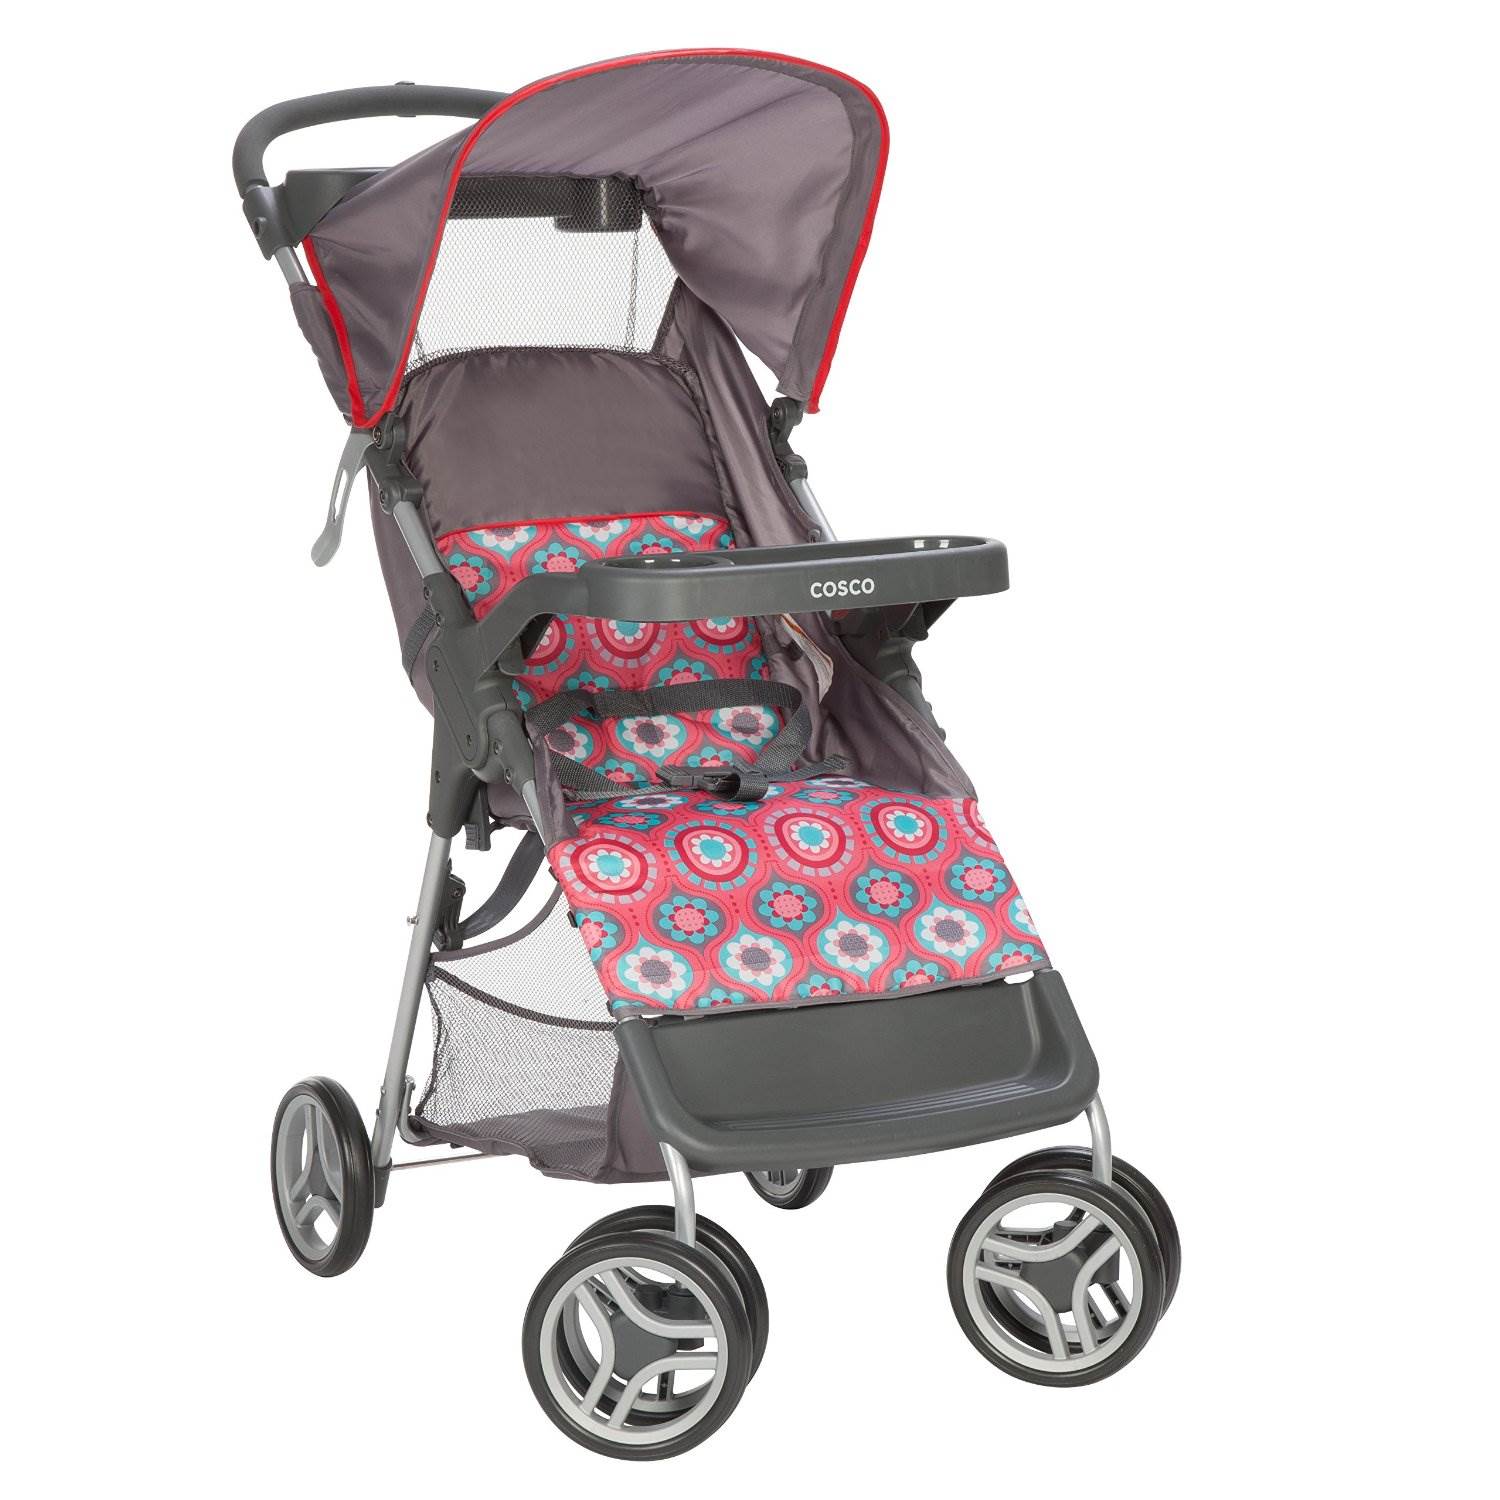 Cosco Lift &amp; Stroll Posey Pop Convenience Standard Stroller - image 1 of 8